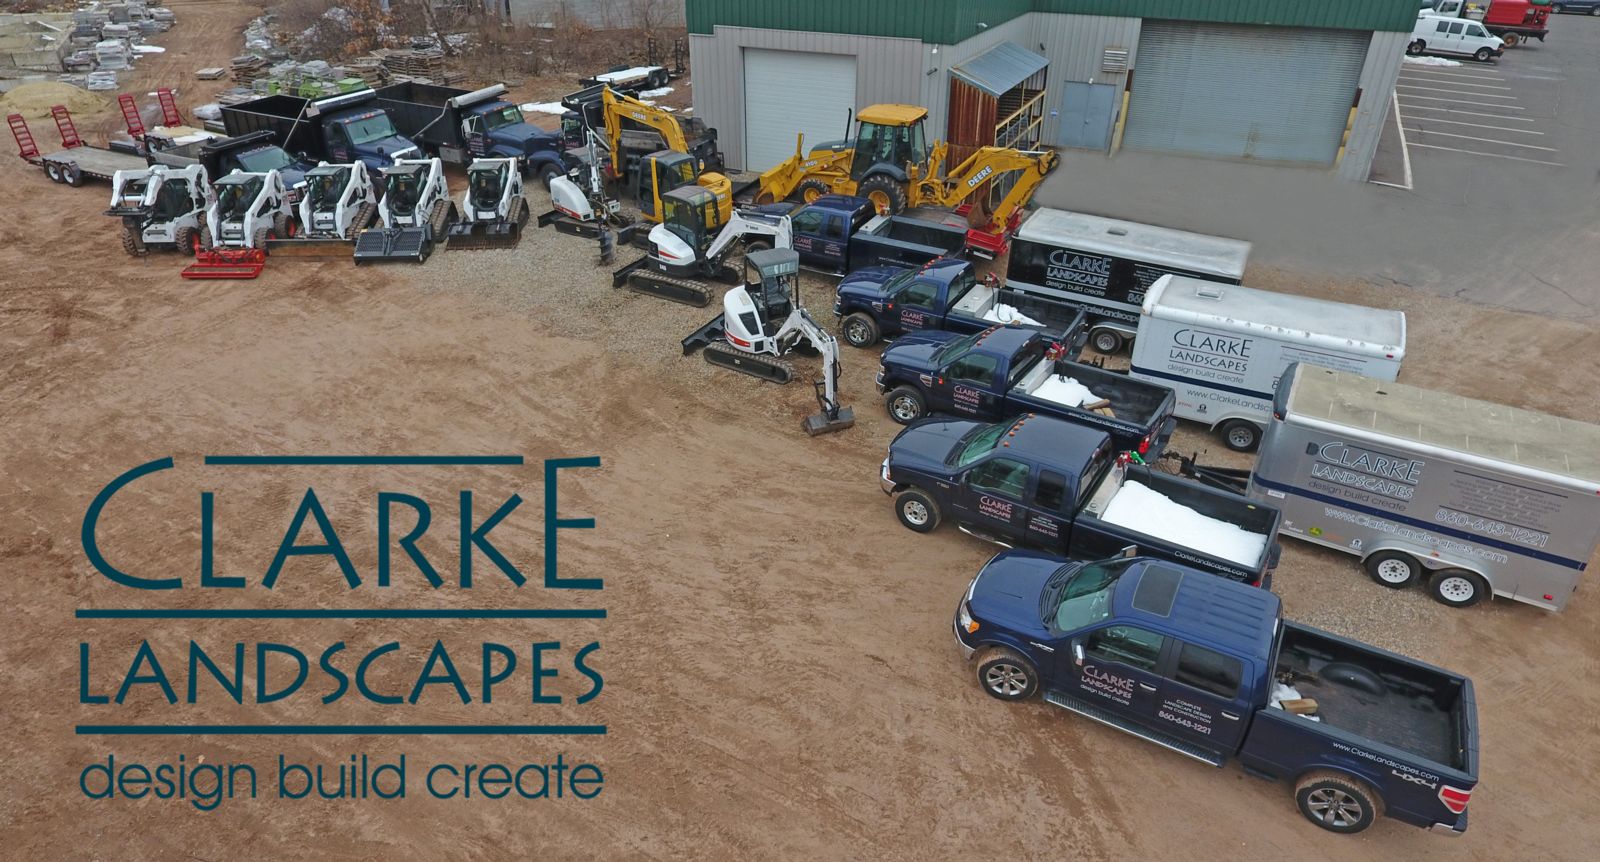 Clarke Landscapes - landscaping companies in Glastonbury CT